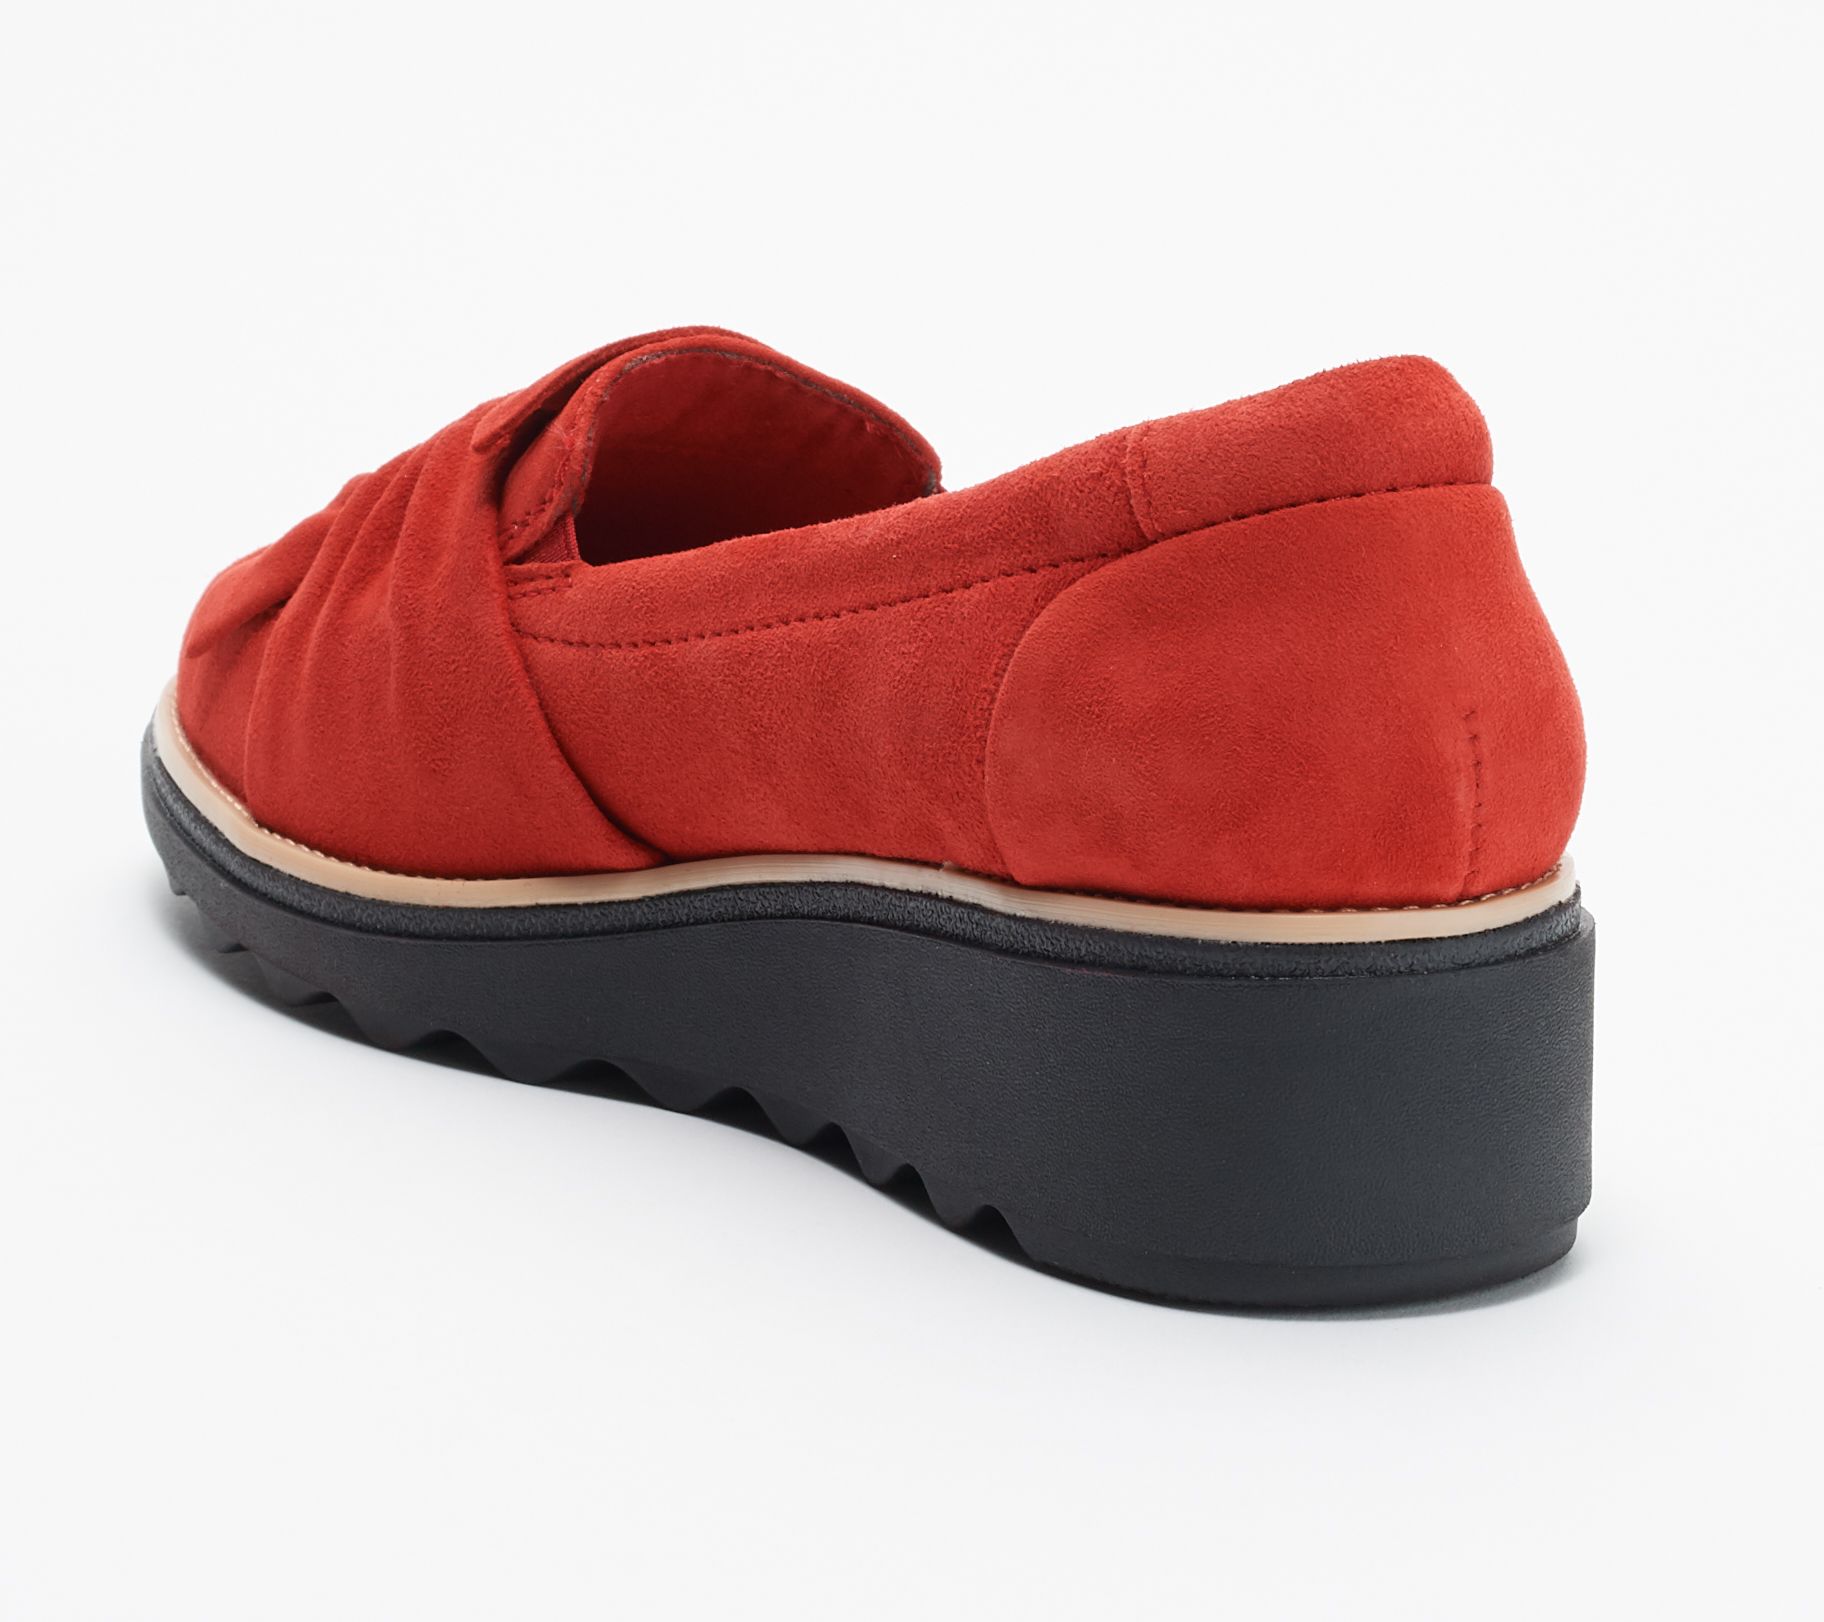 Clarks Collection Suede Slip-On Loafer 